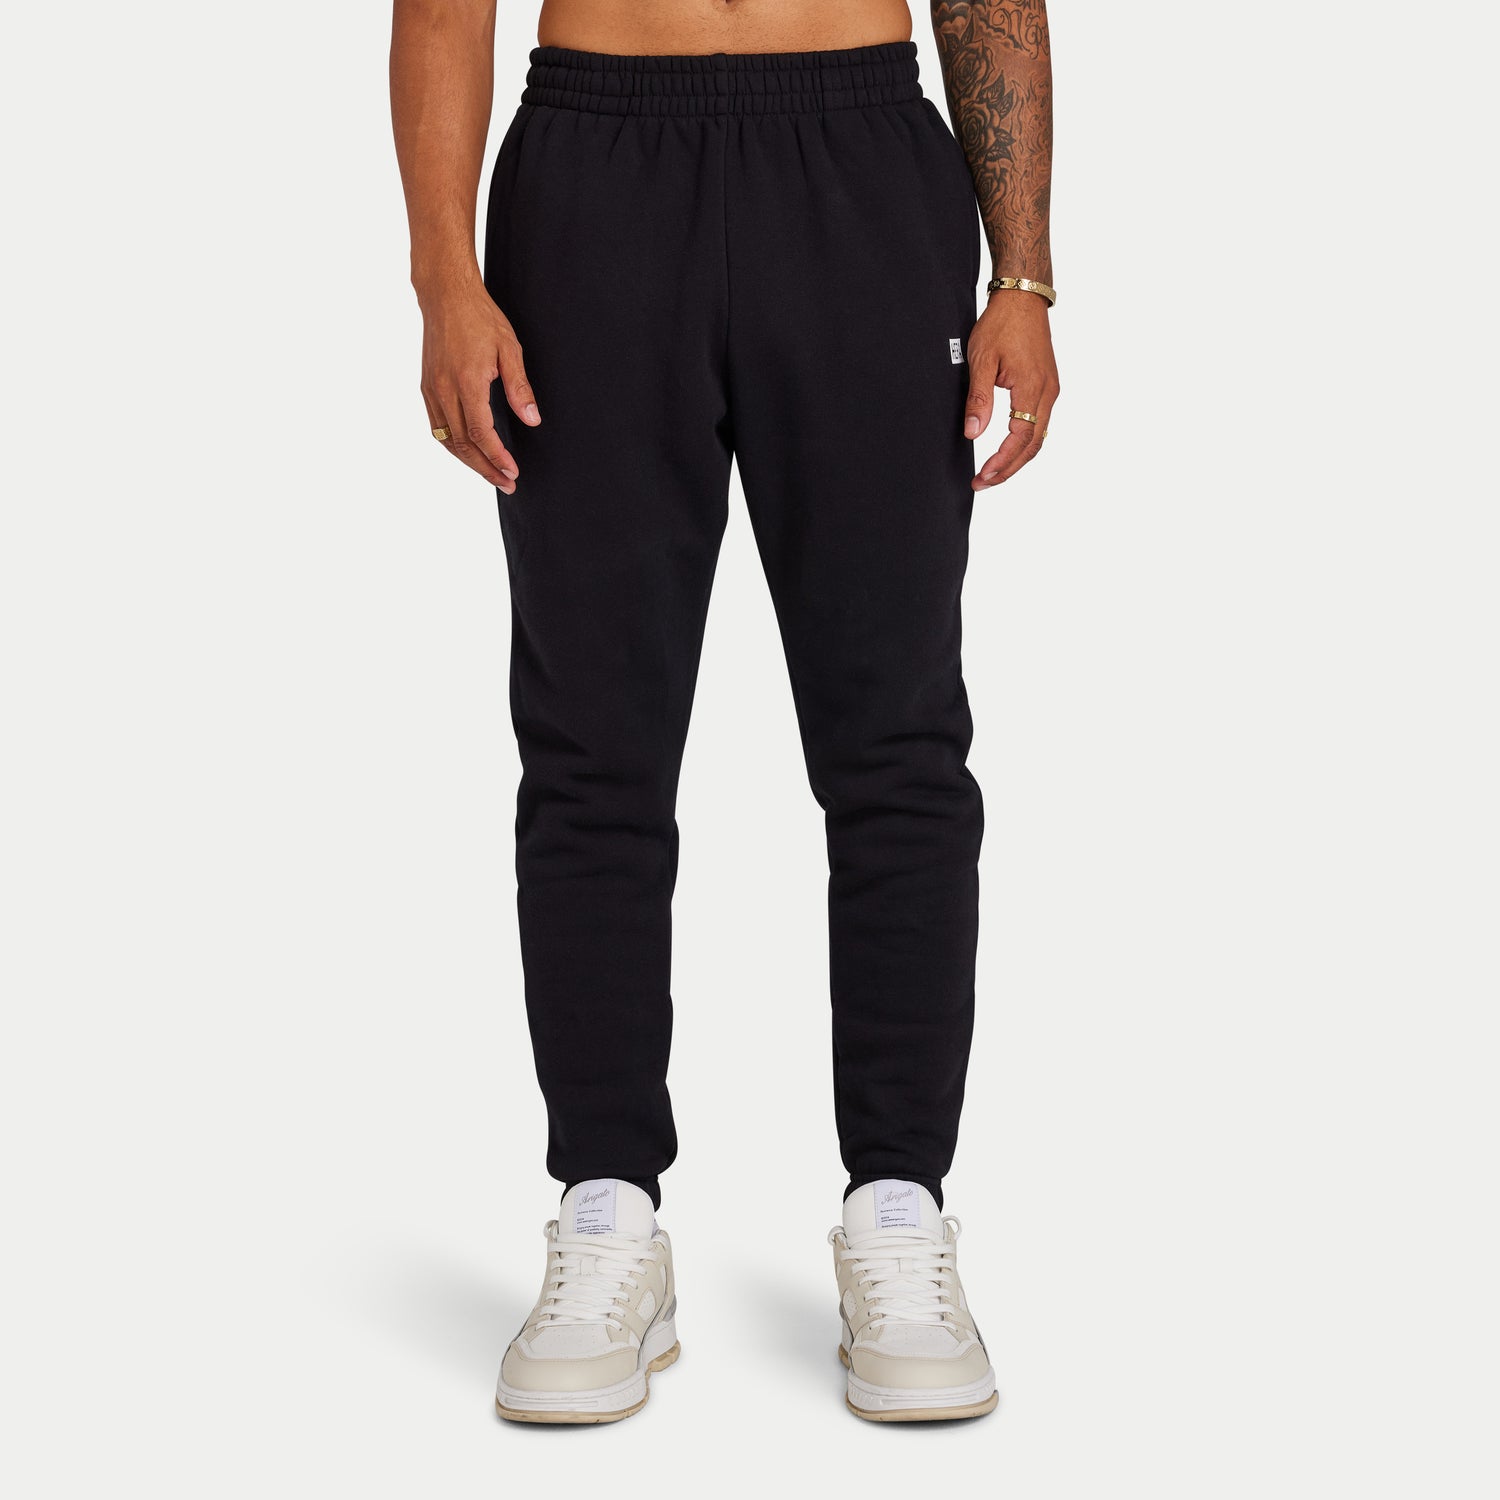 Men's Relaxed Fit Sweatpants